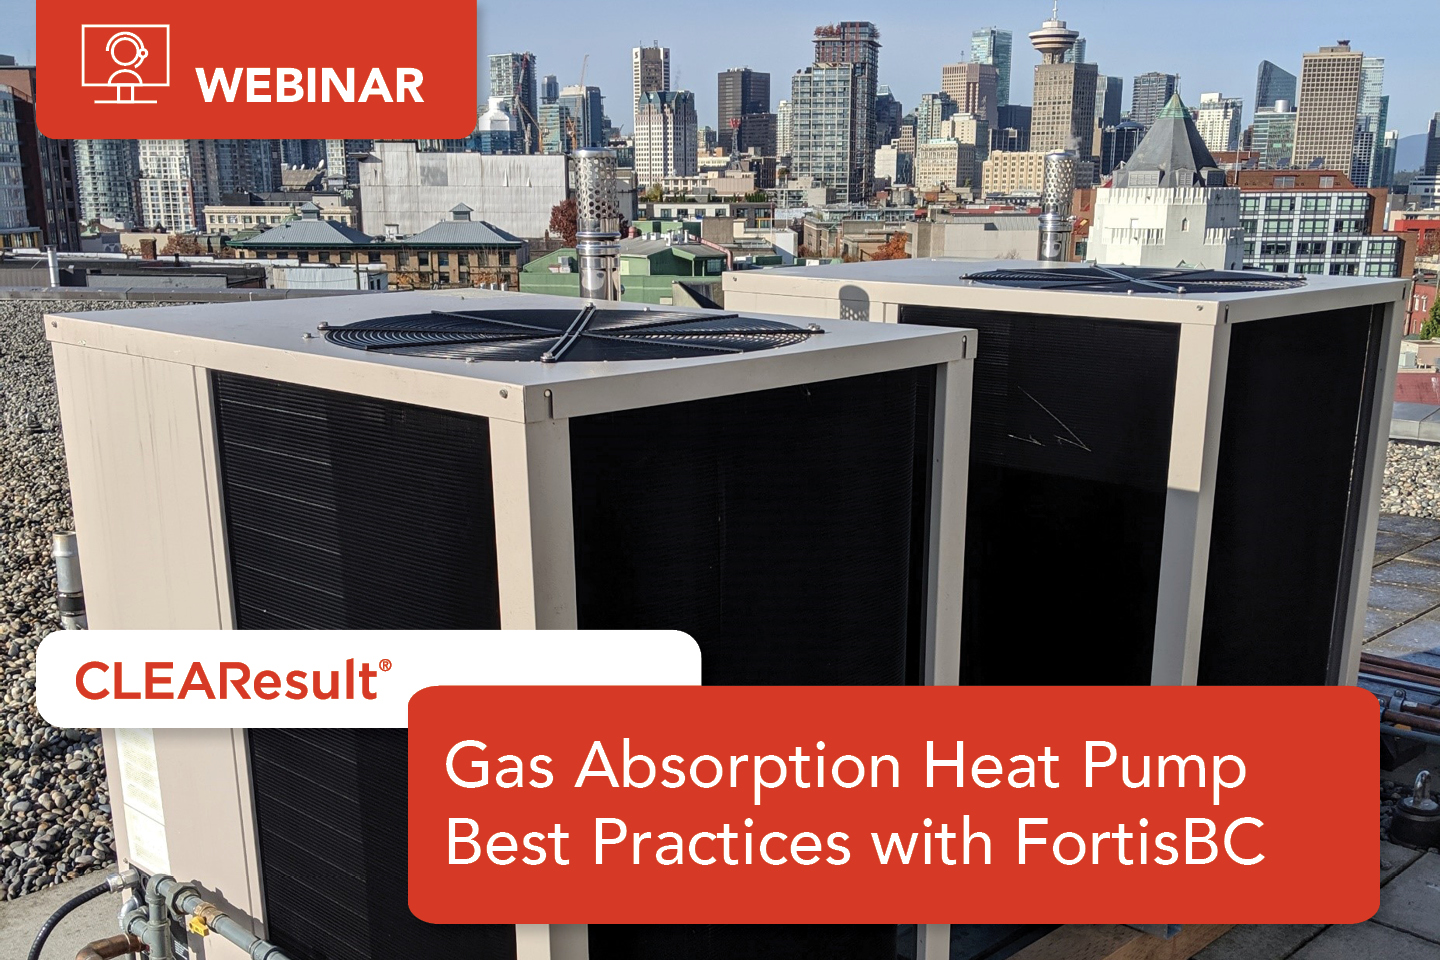 RSVP: Gas Absorption Heat Pump Best Practices with FortisBC